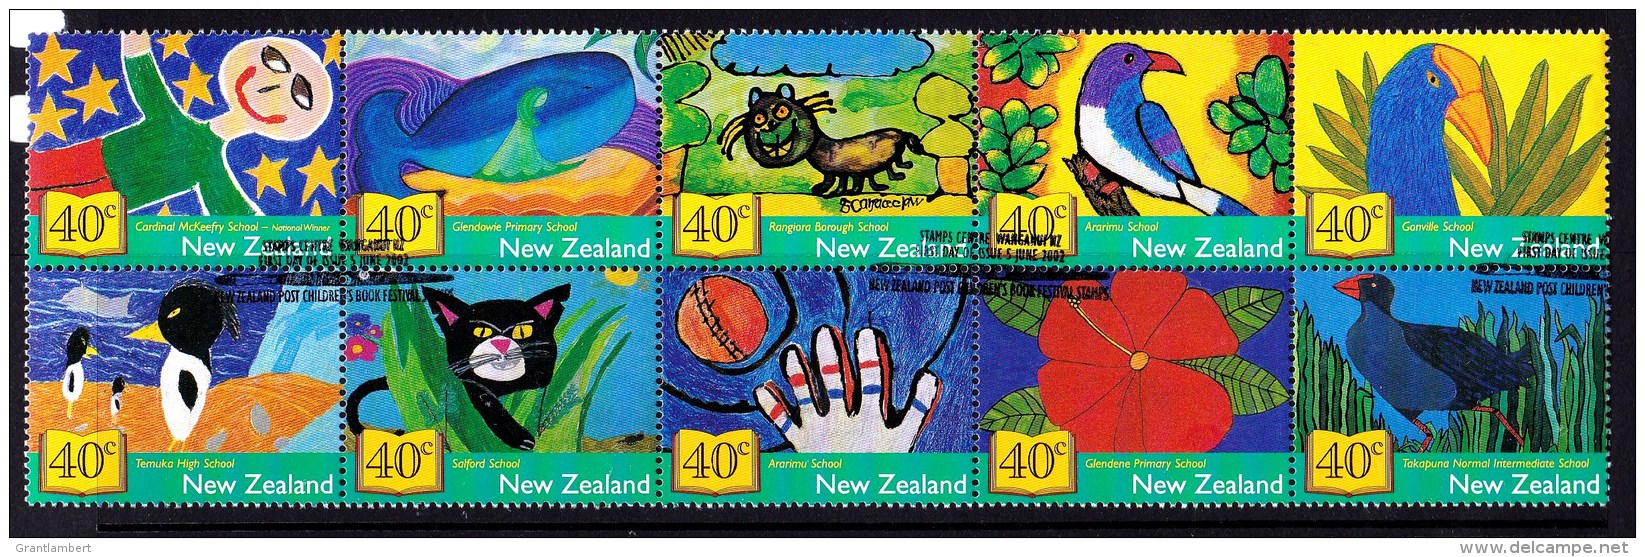 New Zealand 2002 Children's Book Festival Block Of 10 CTO - Used Stamps